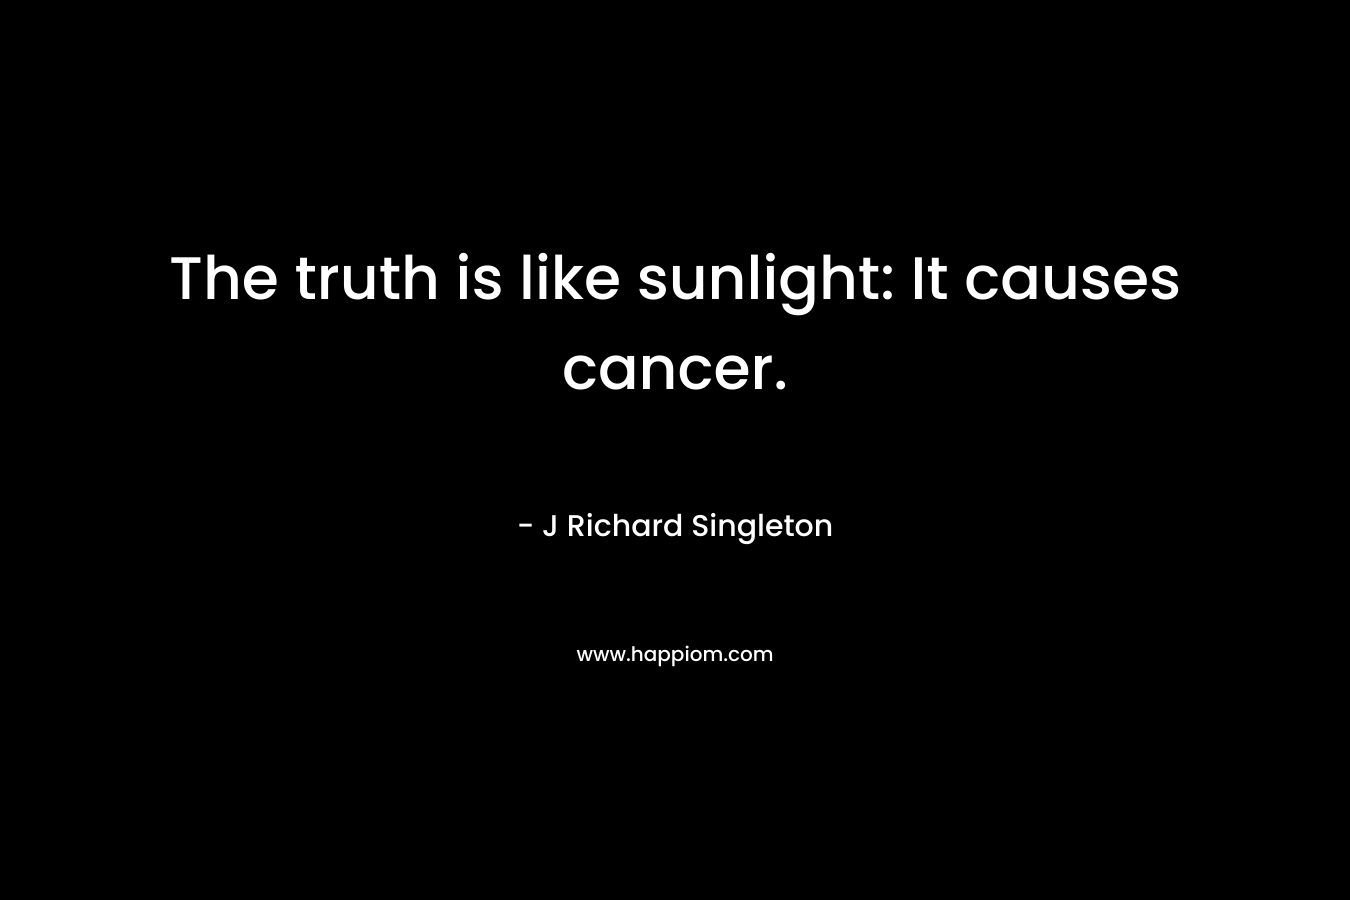 The truth is like sunlight: It causes cancer.